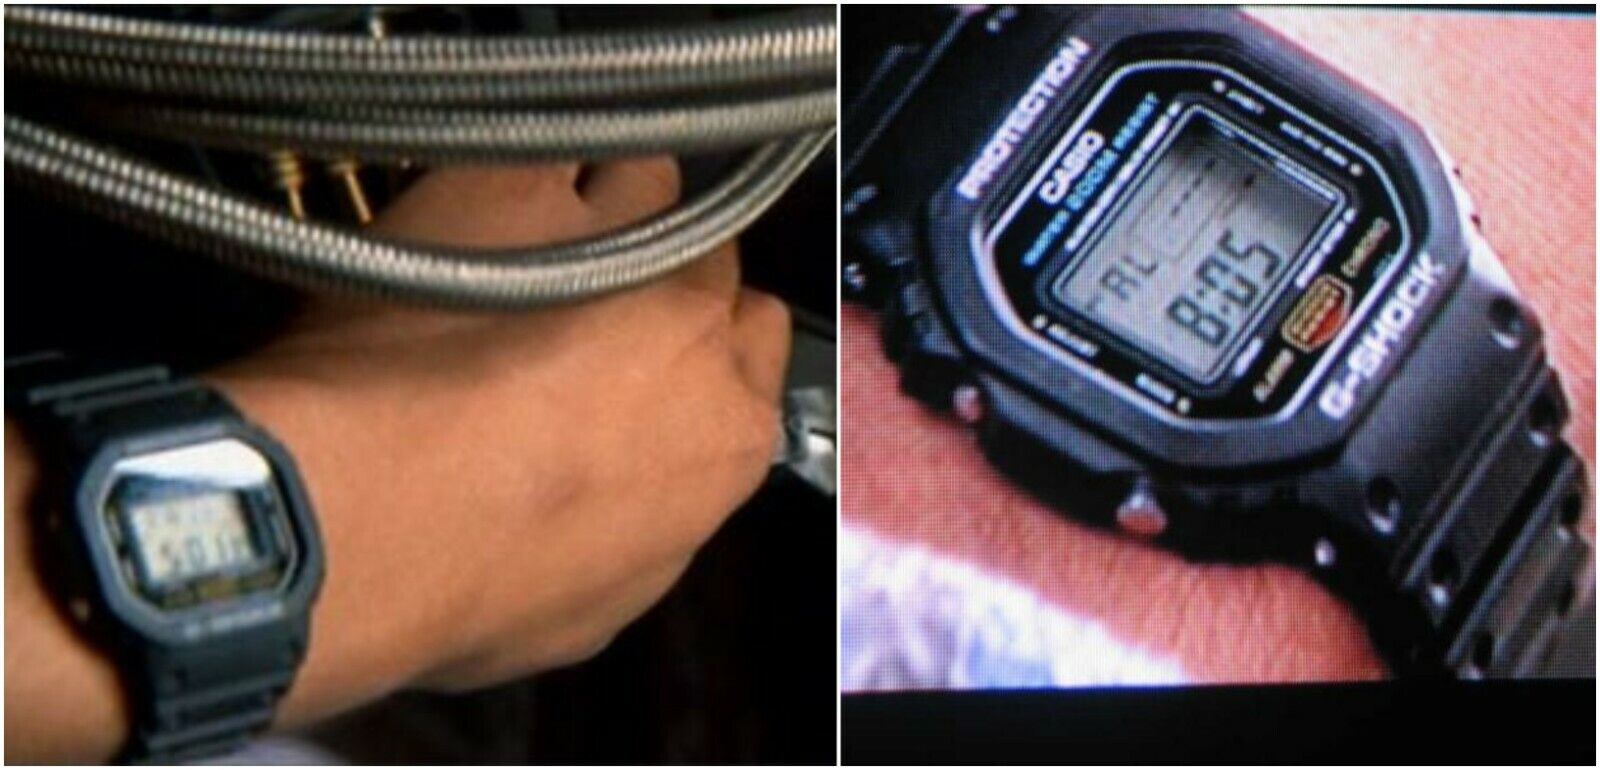 RARE 1990 Casio G-SHOCK DW-5600C-1V 901 as Worn by Keanu Reeves in 